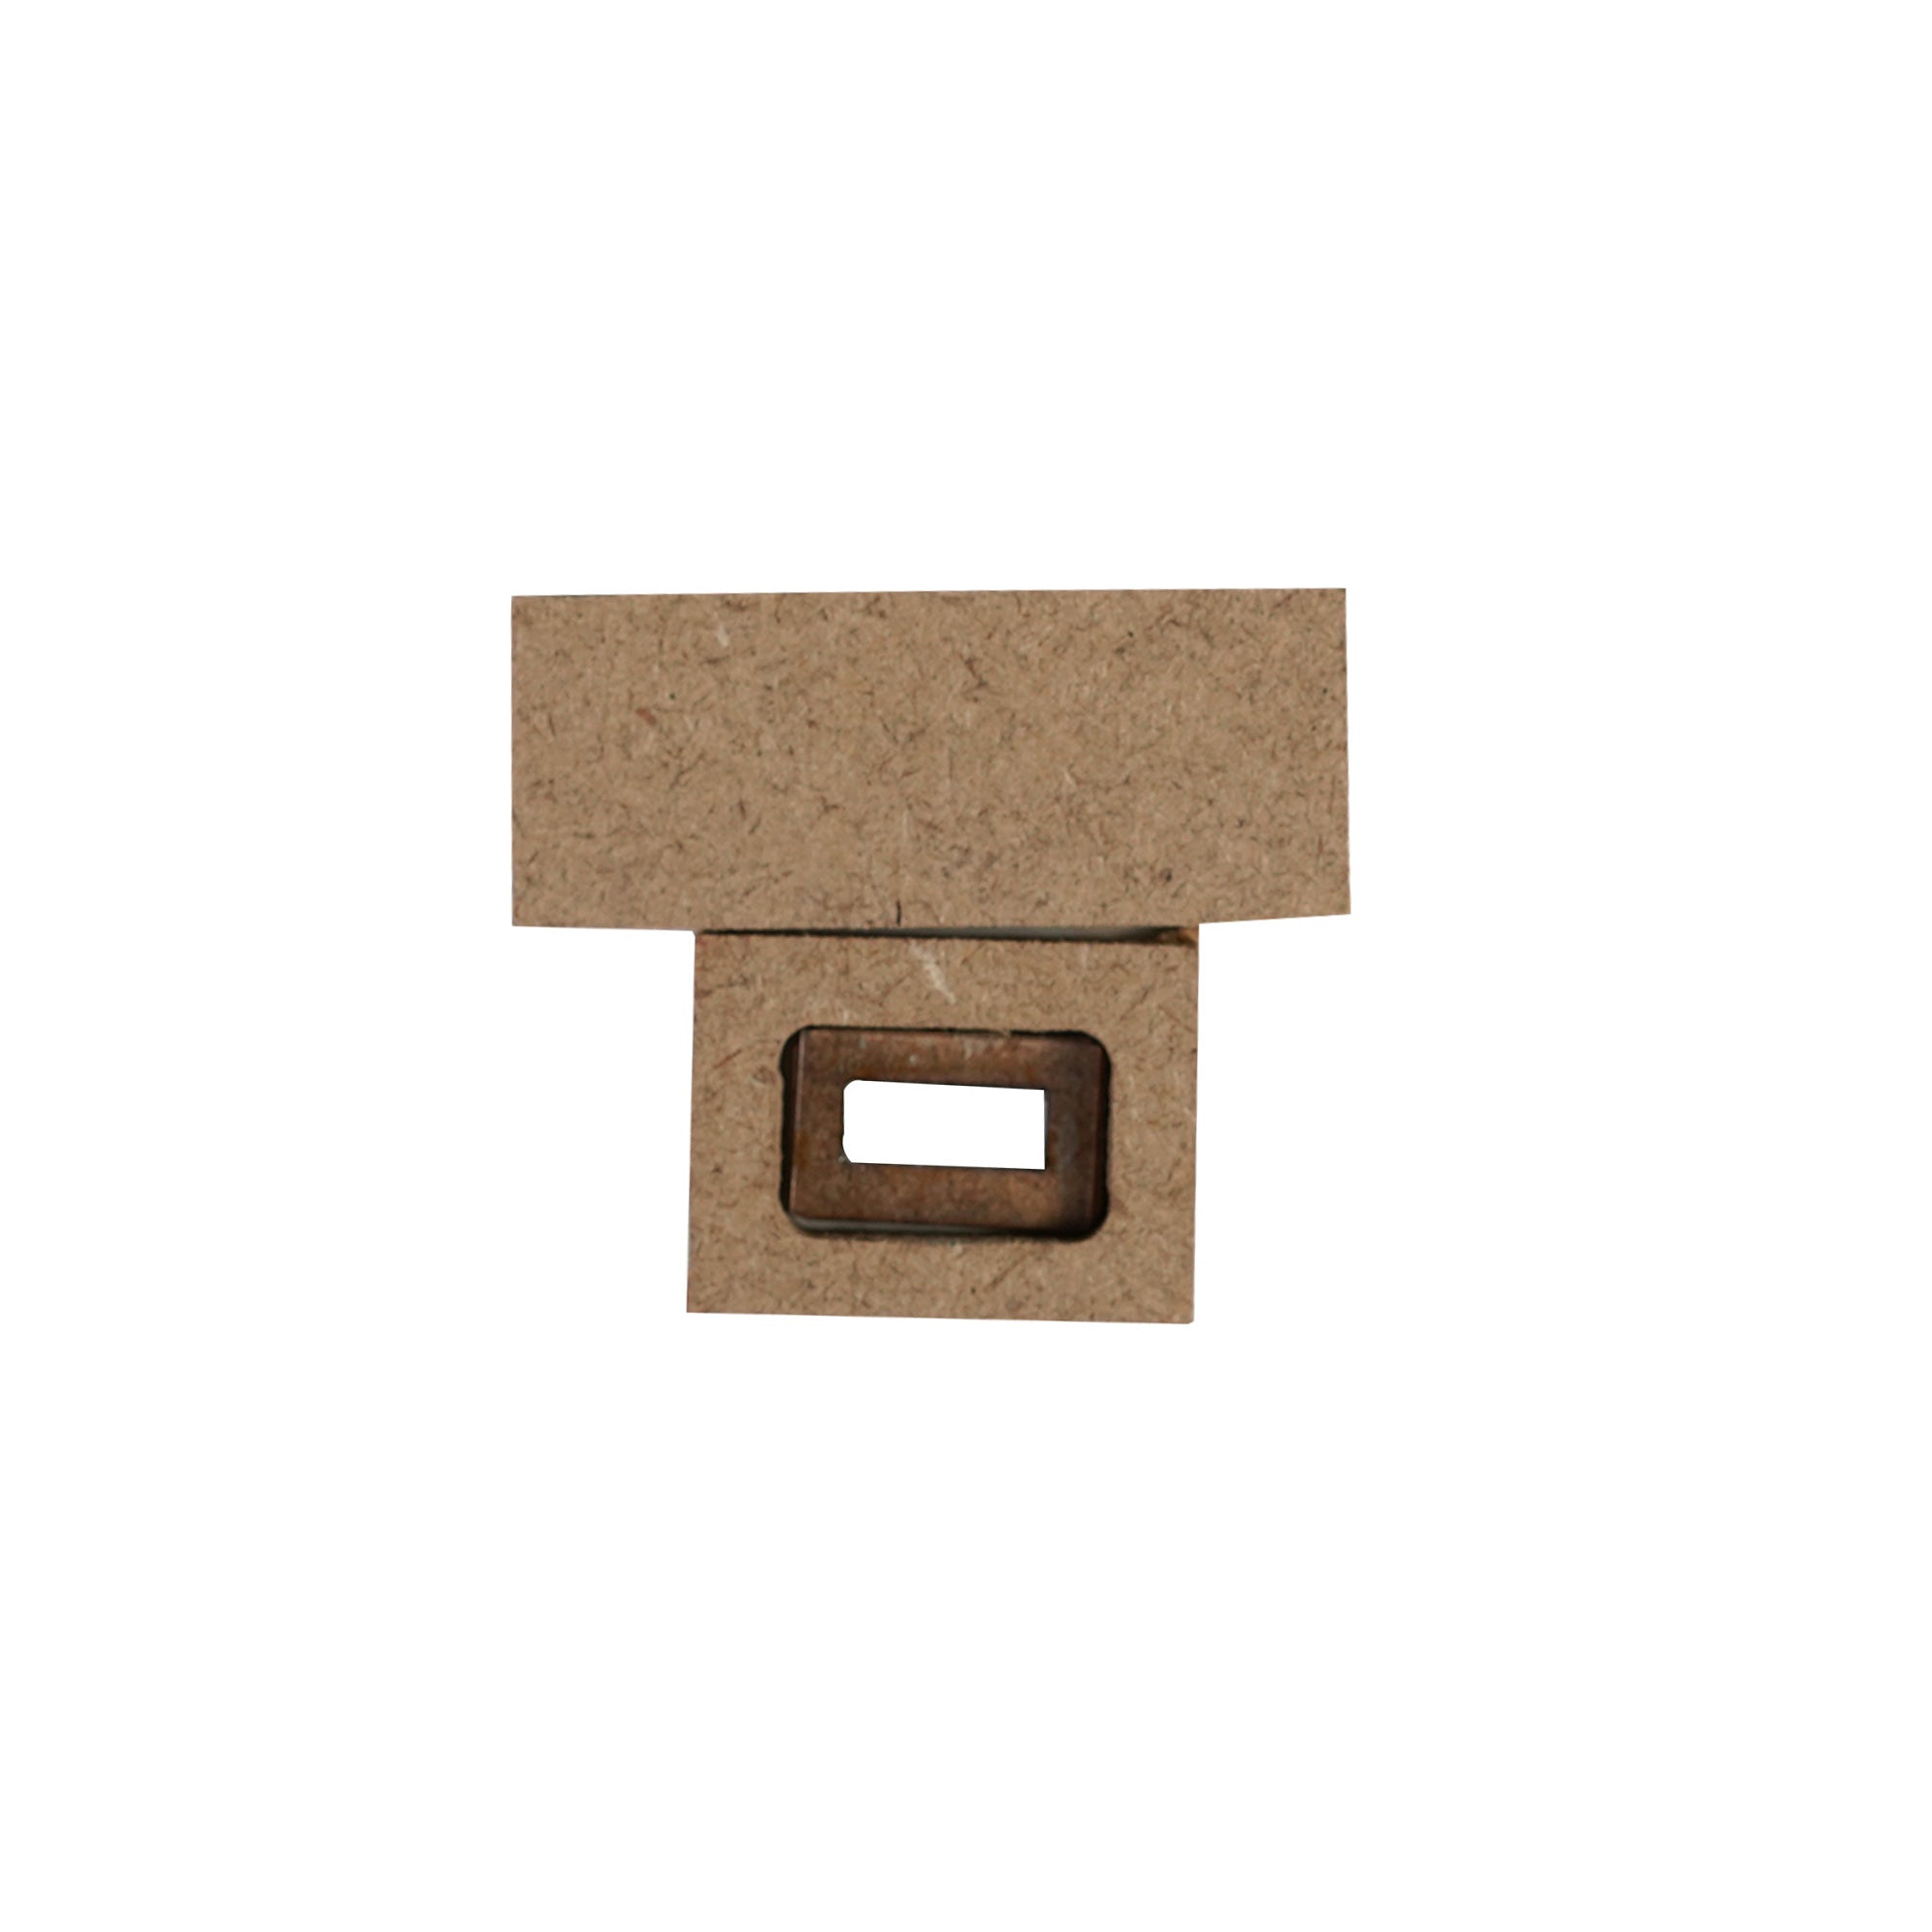 Build A Home Small Window W24 X H18 mm 2pc